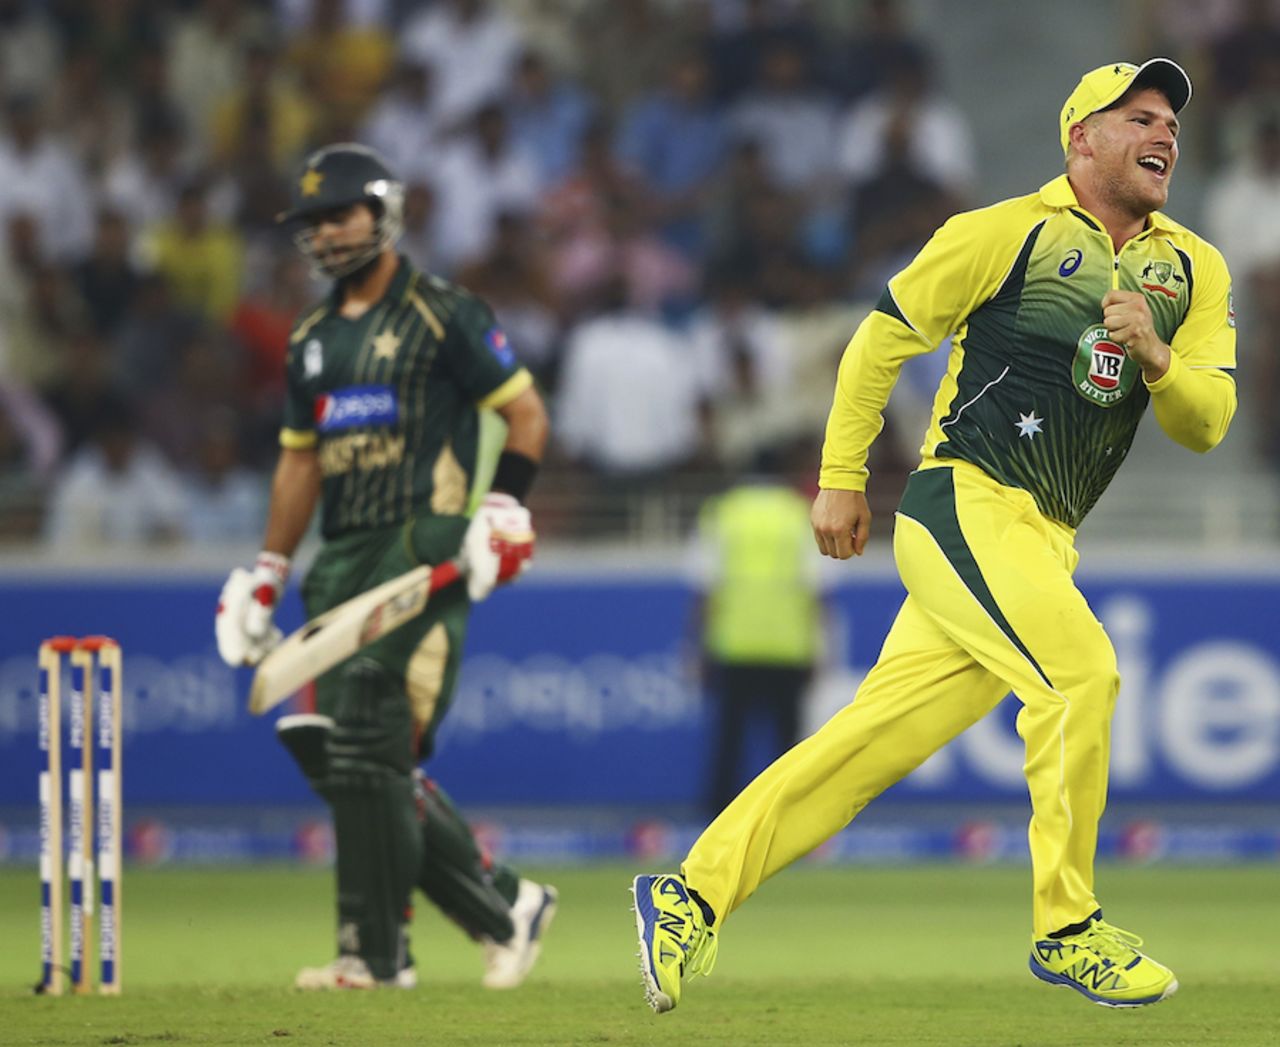 Aaron Finch takes off after taking a catch at first slip, Pakistan v Australia, only T20I, Dubai, October 5, 2014